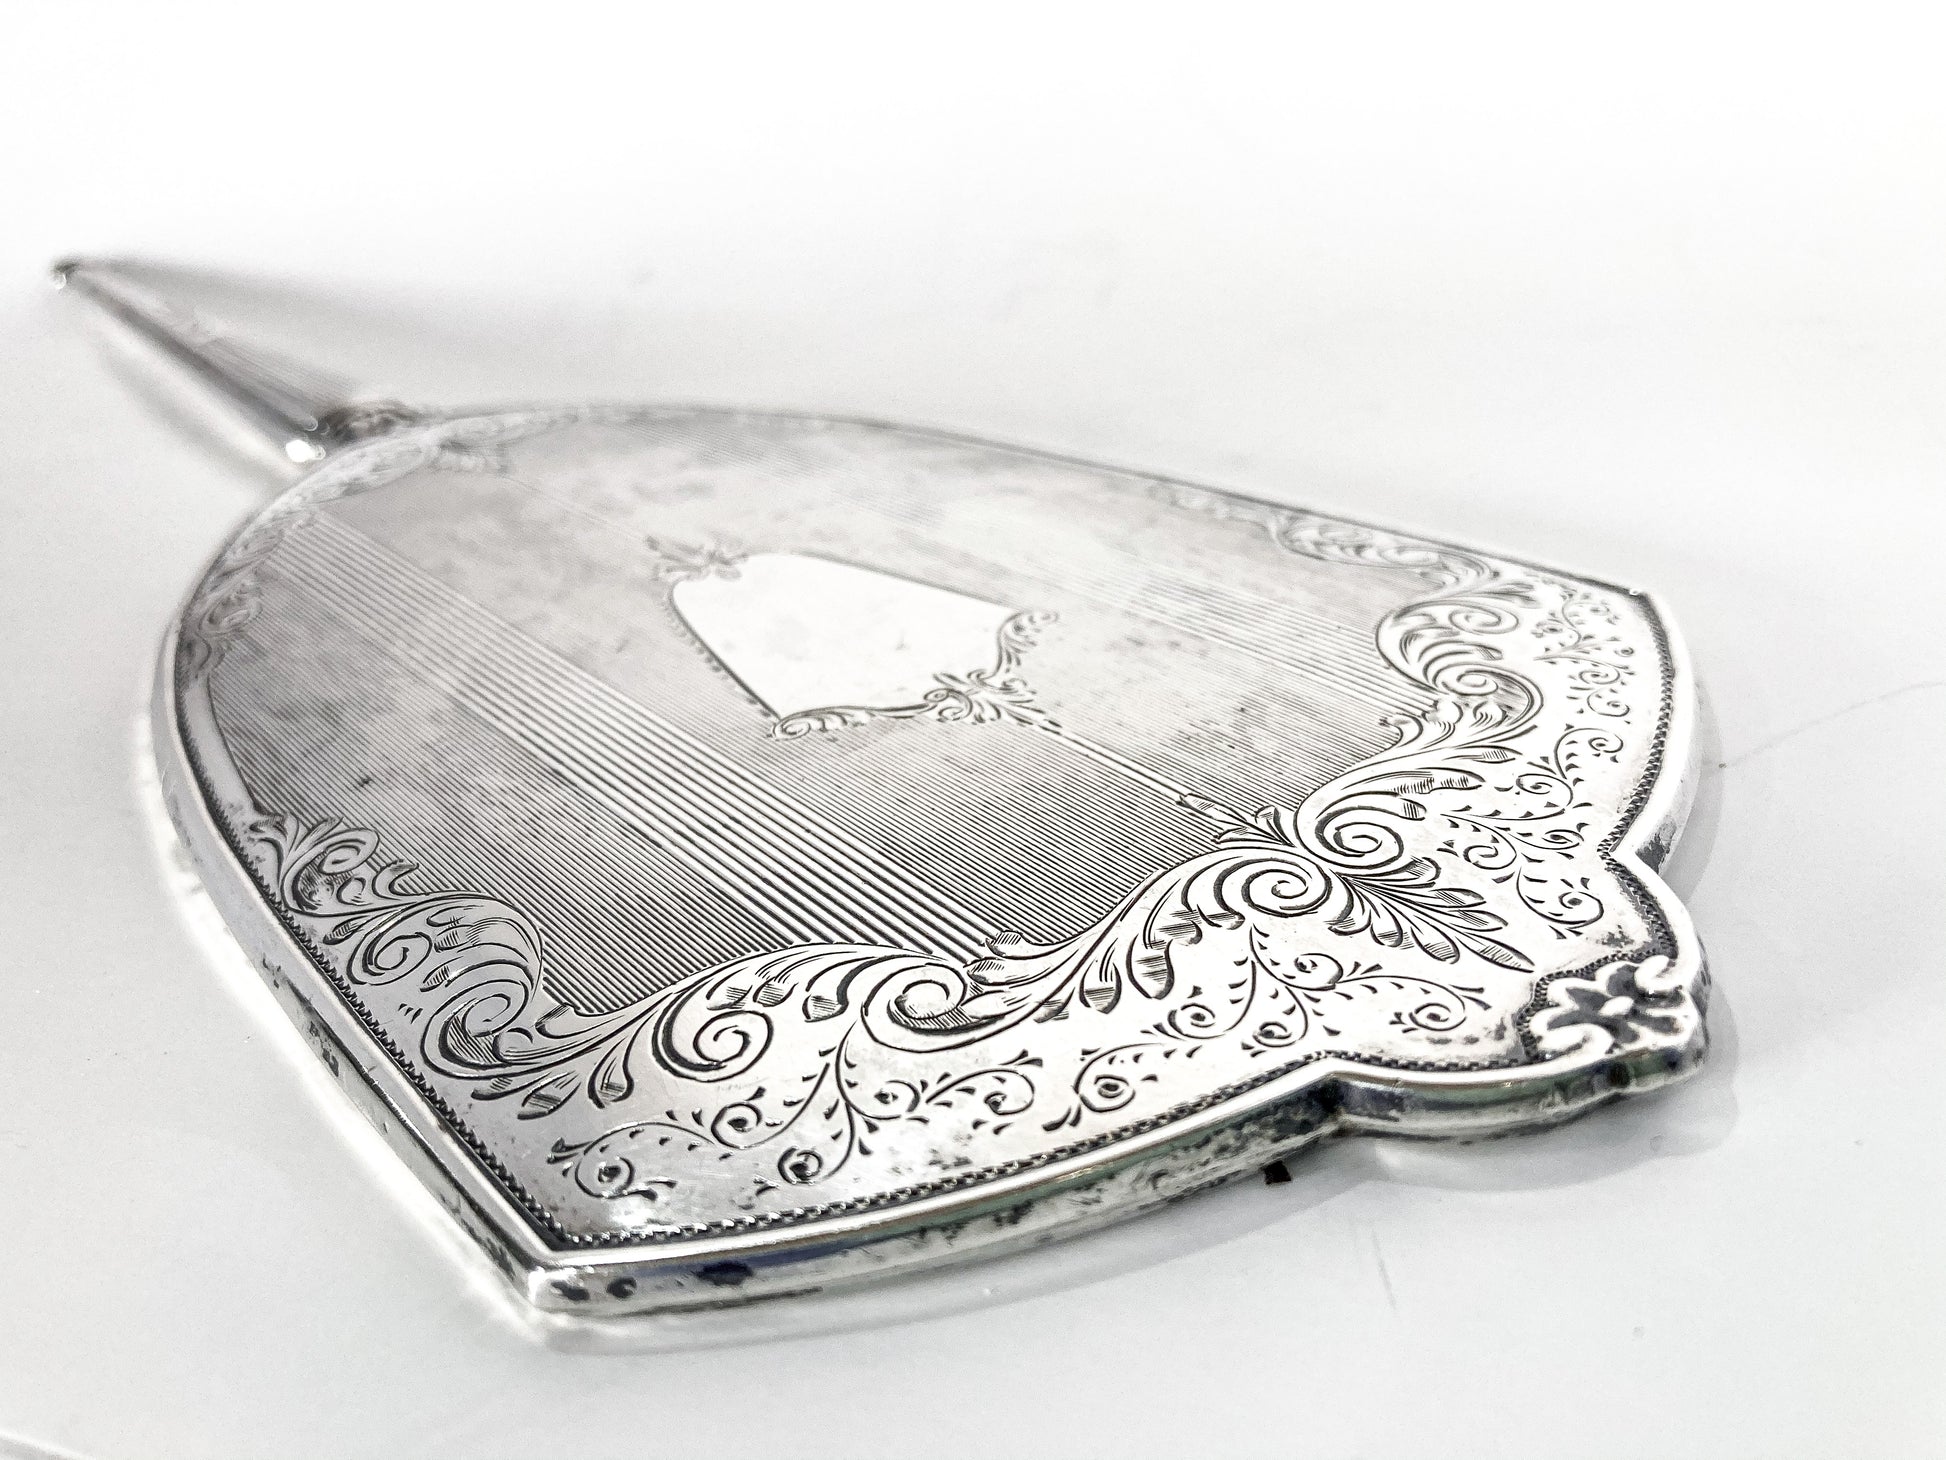 Vintage Haddon Hall Sterling Silver Glamorous Vanity Hand Mirror Top Close Up Engraving